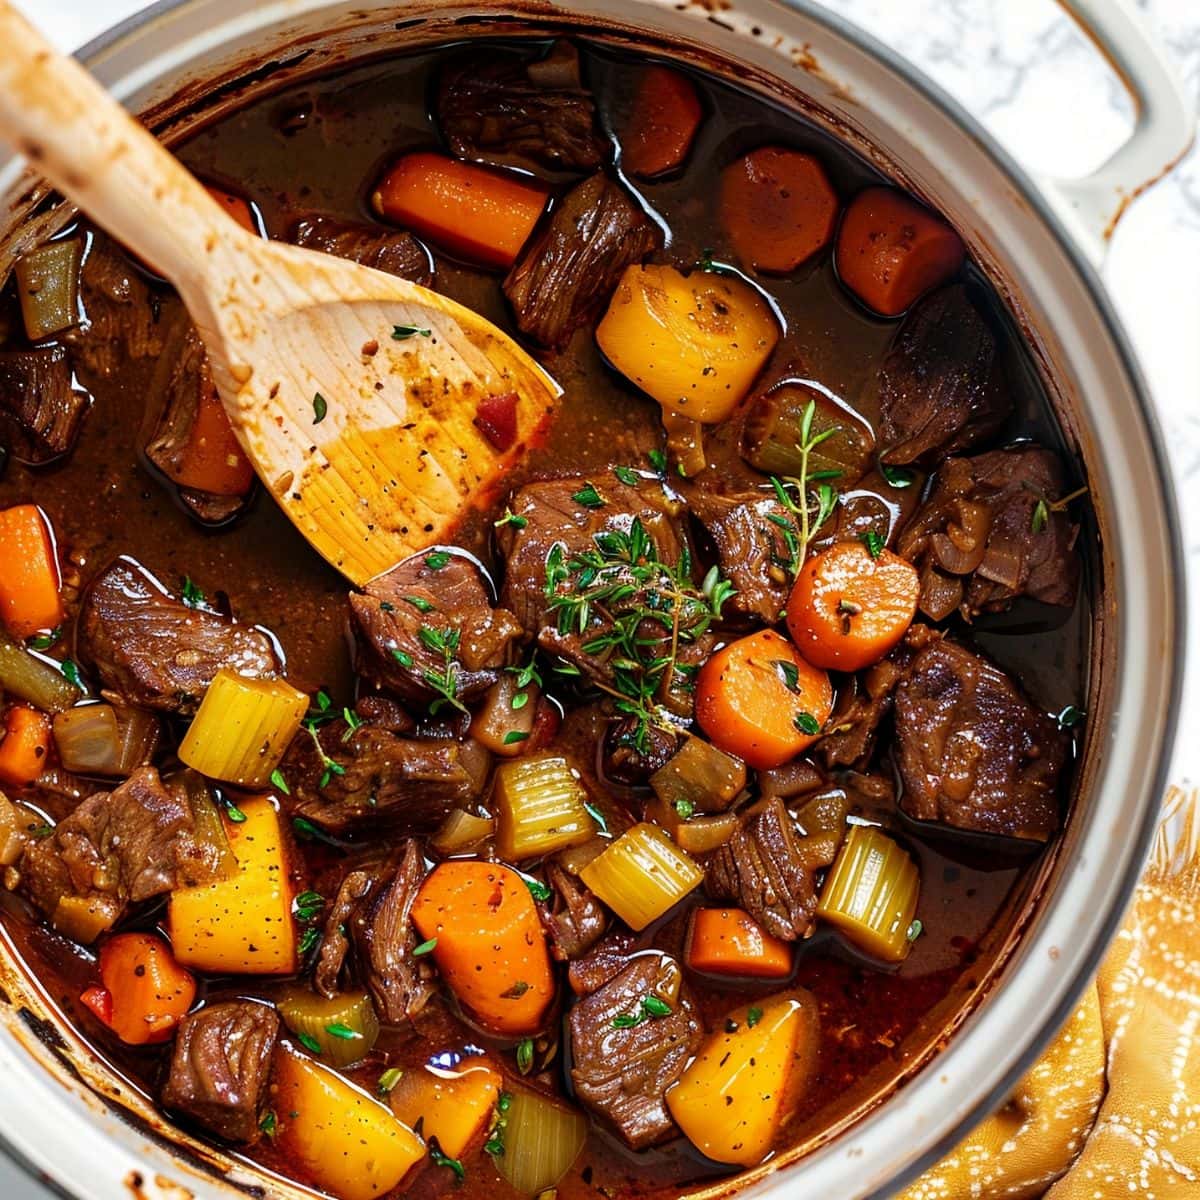 Top View of Guinness Beef Stew with Meaty Beef, Carrots, Celery, and Herbs in a White Dutch Oven with a Wooden Spoon on a White Marble Table with a Yellow Kitchen Towel